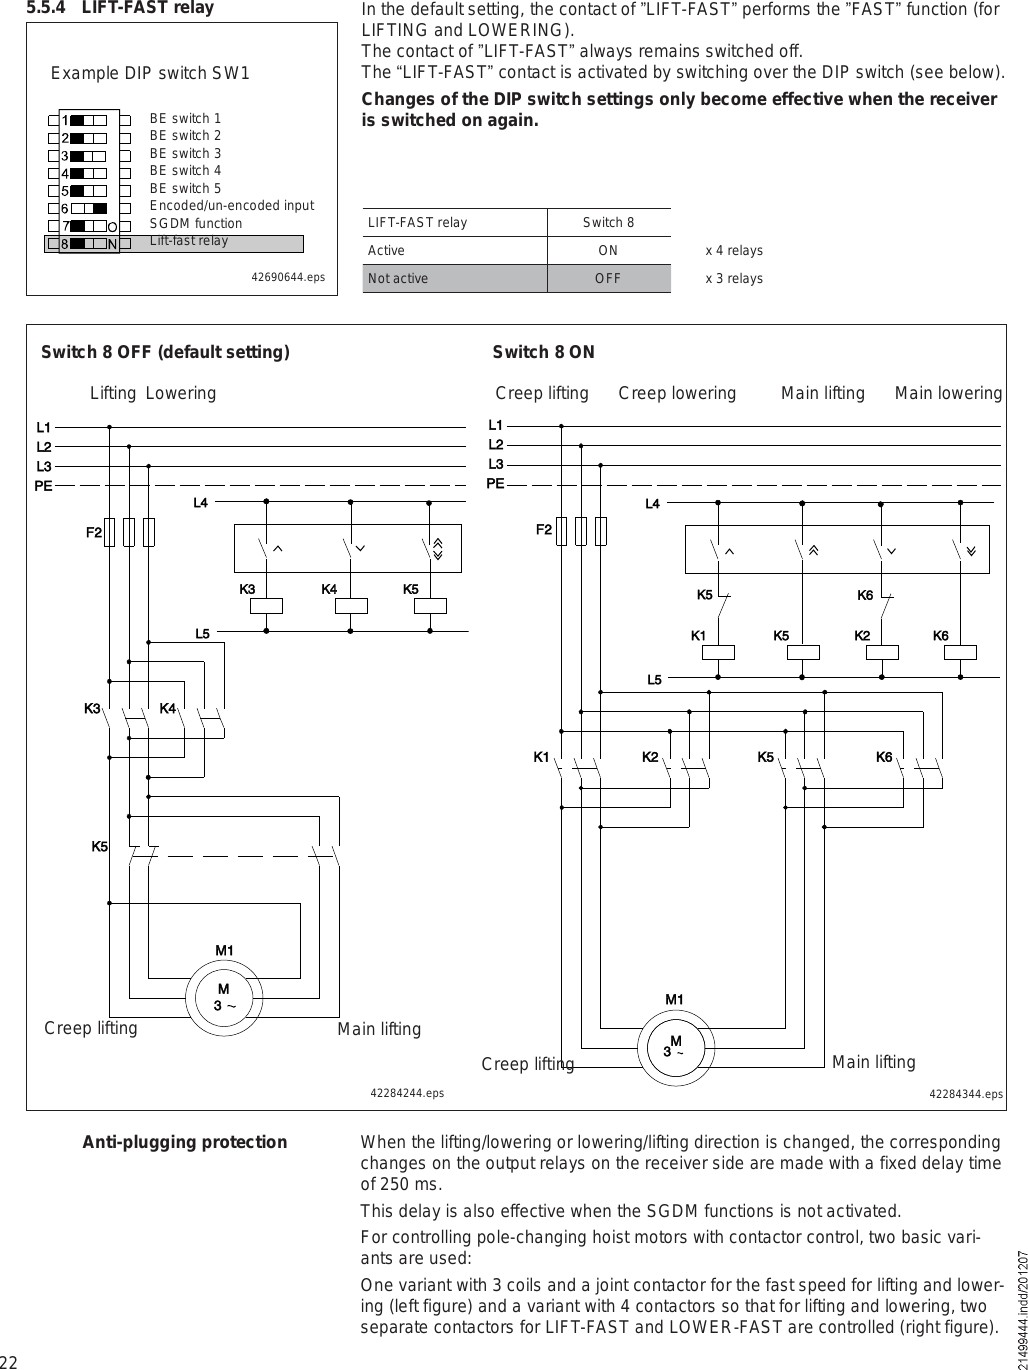 Amazing Ab Safety Relay Pattern Best for wiring diagram